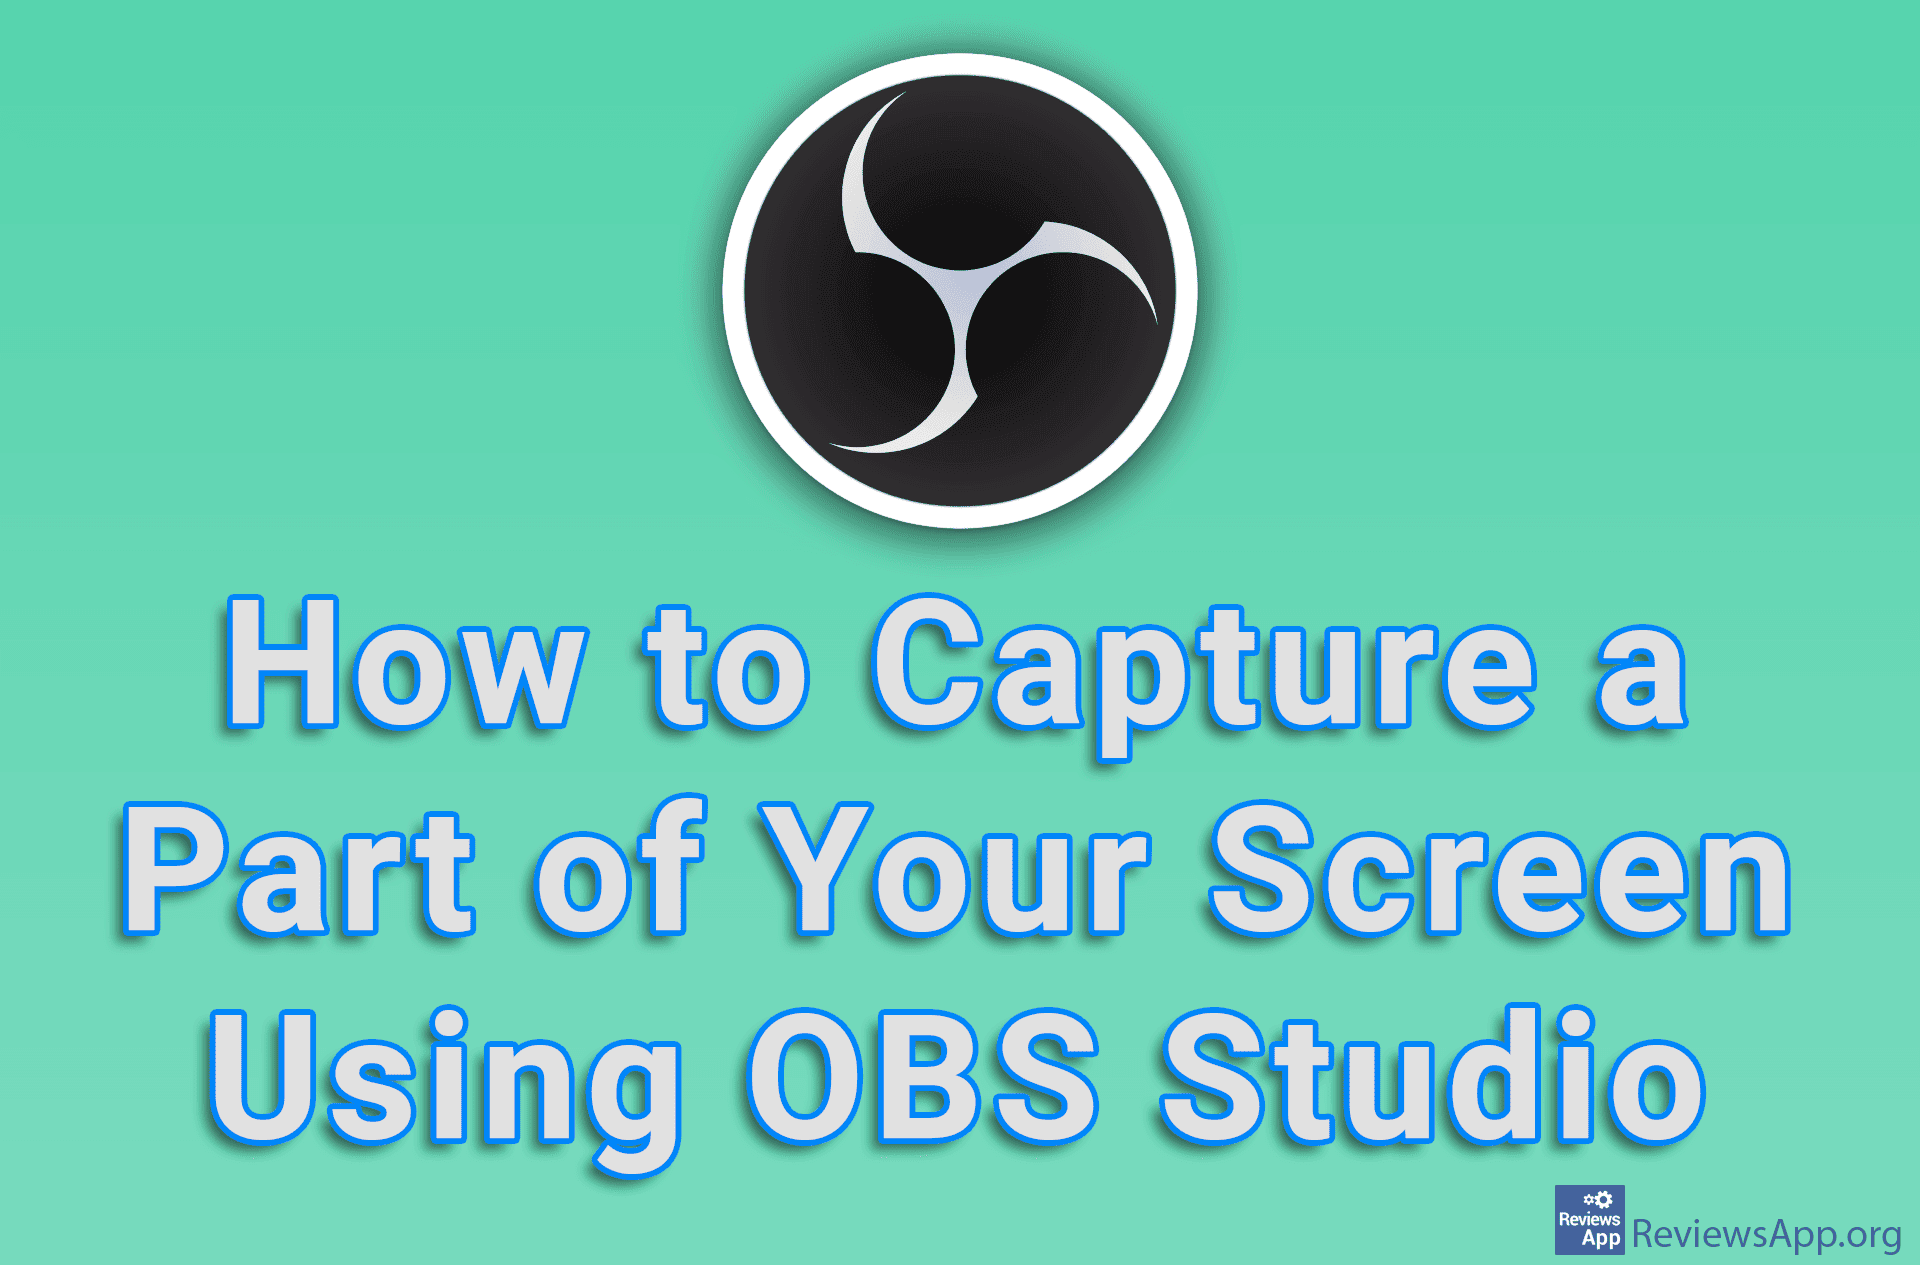 How to Capture a Part of Your Screen Using OBS Studio